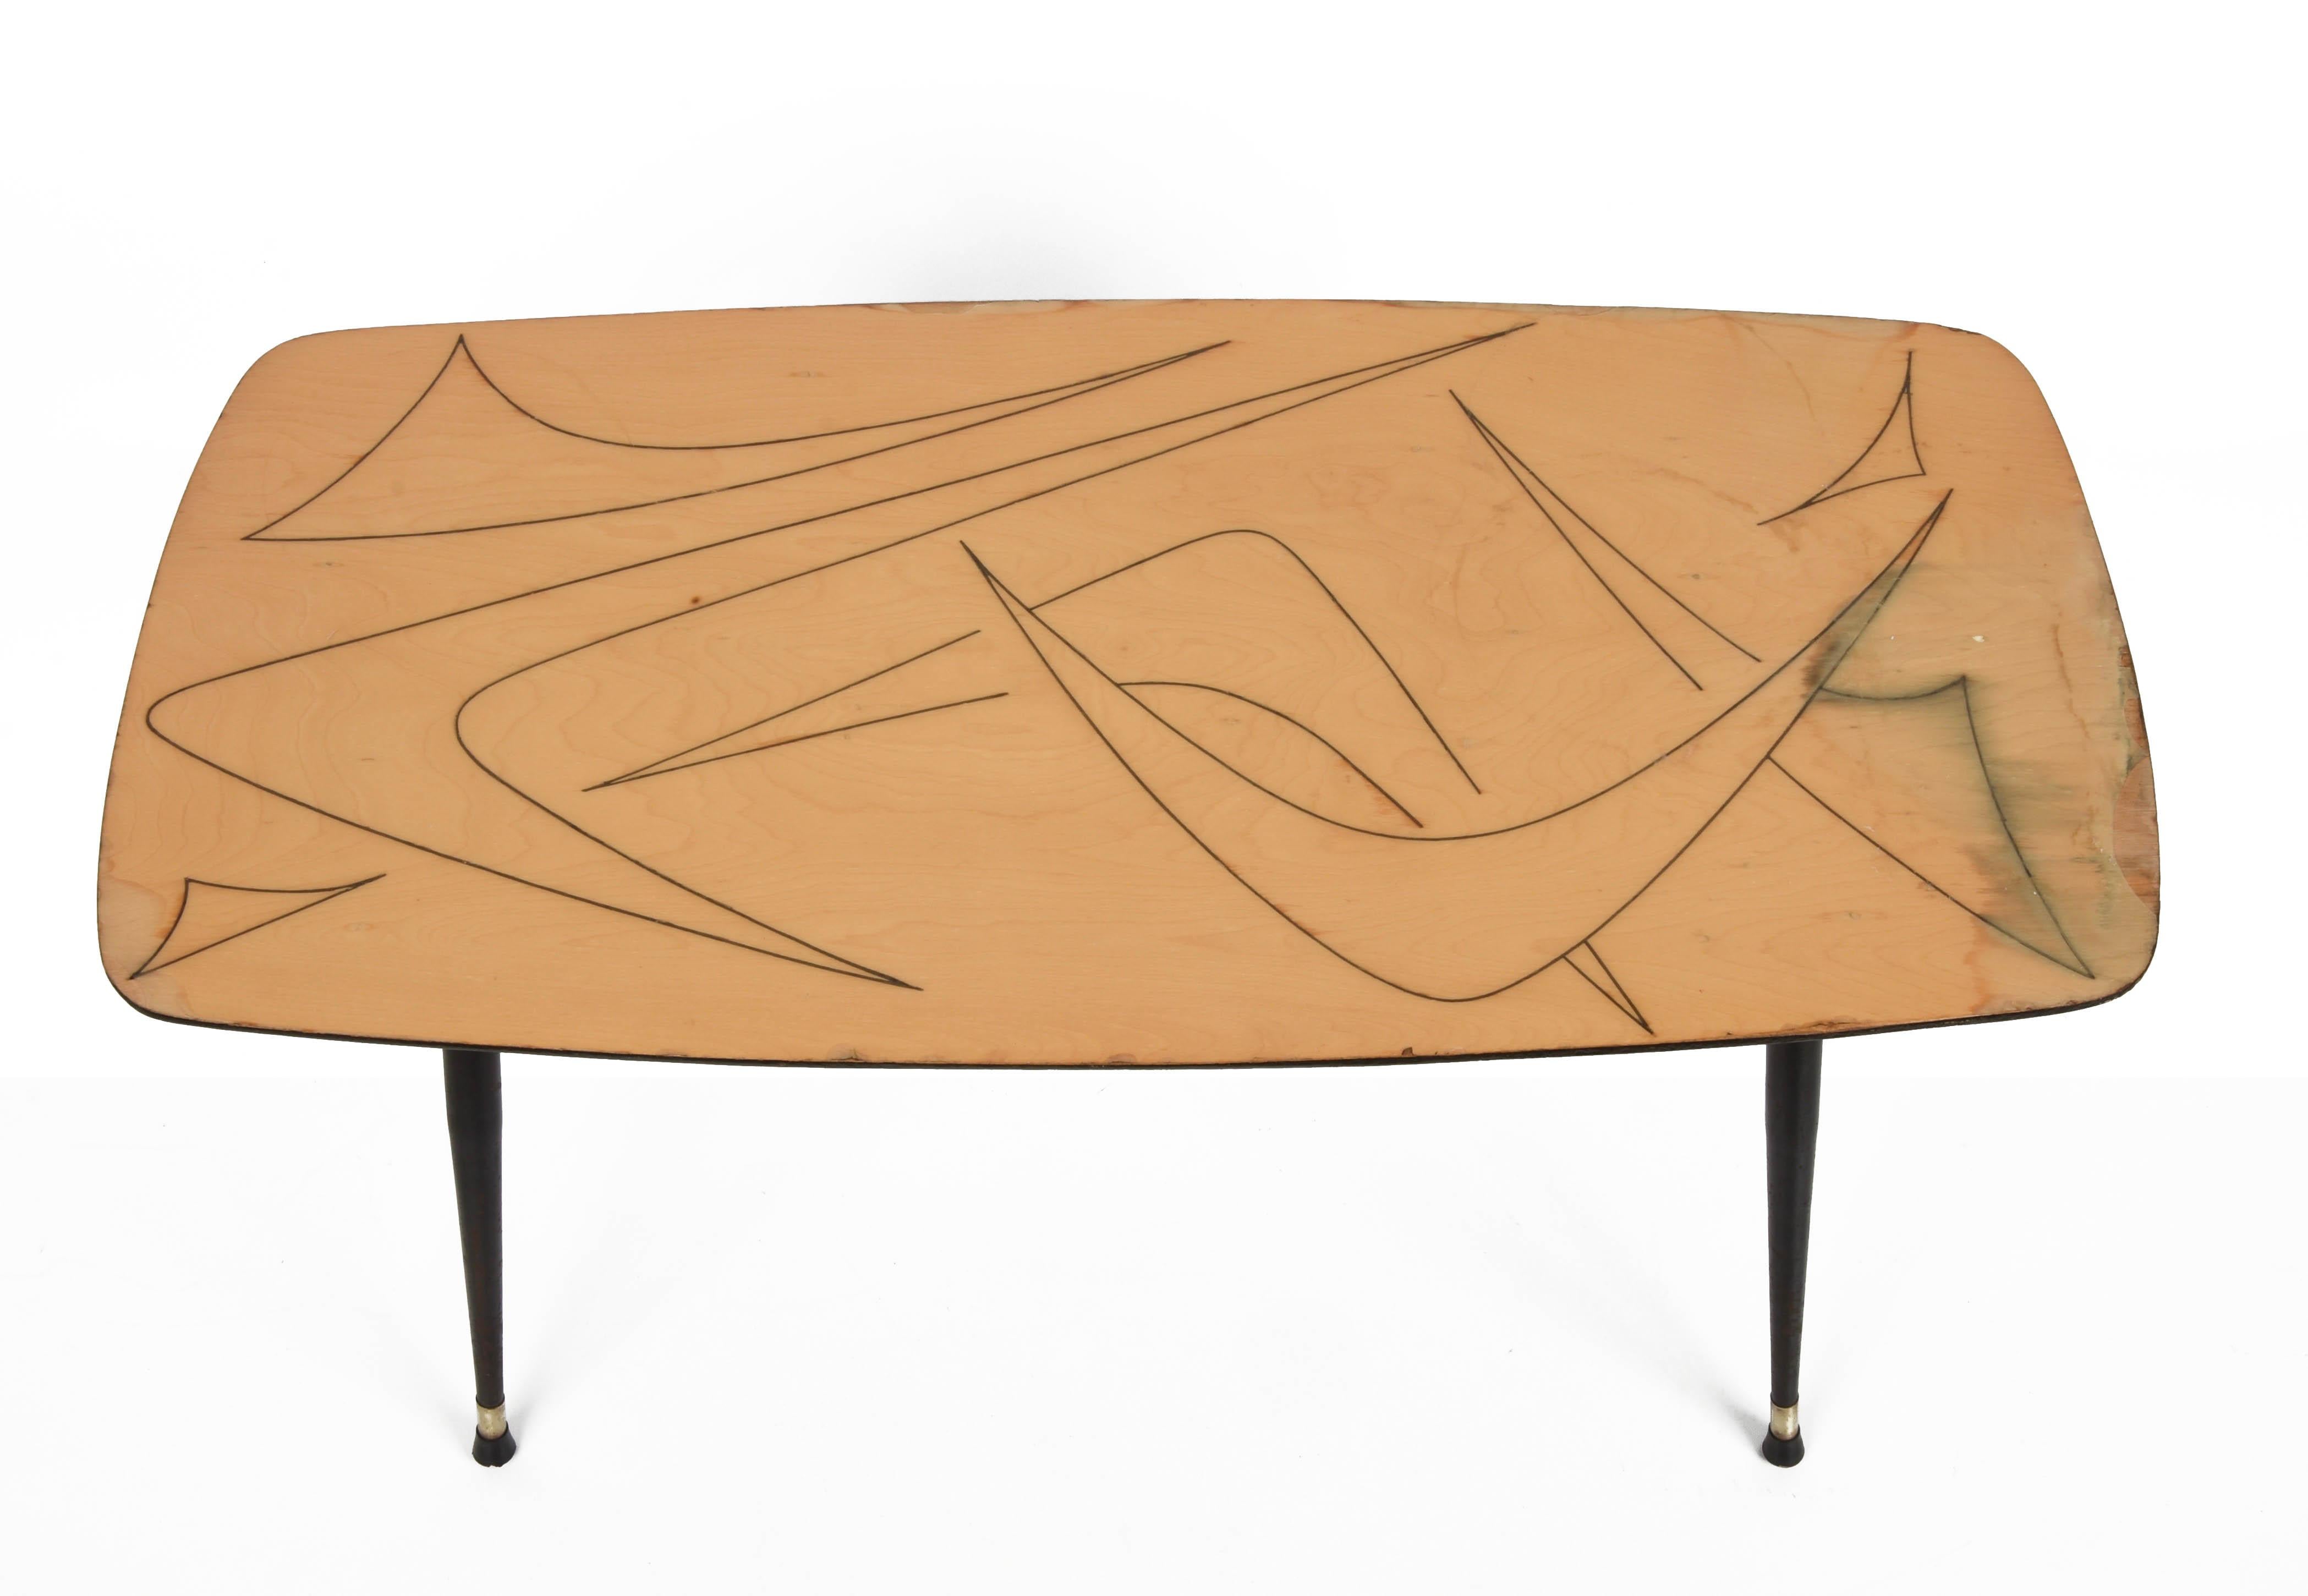 Midcentury Italian Painted Wood, Brass and Black Metal Coffee Table, 1950s For Sale 7